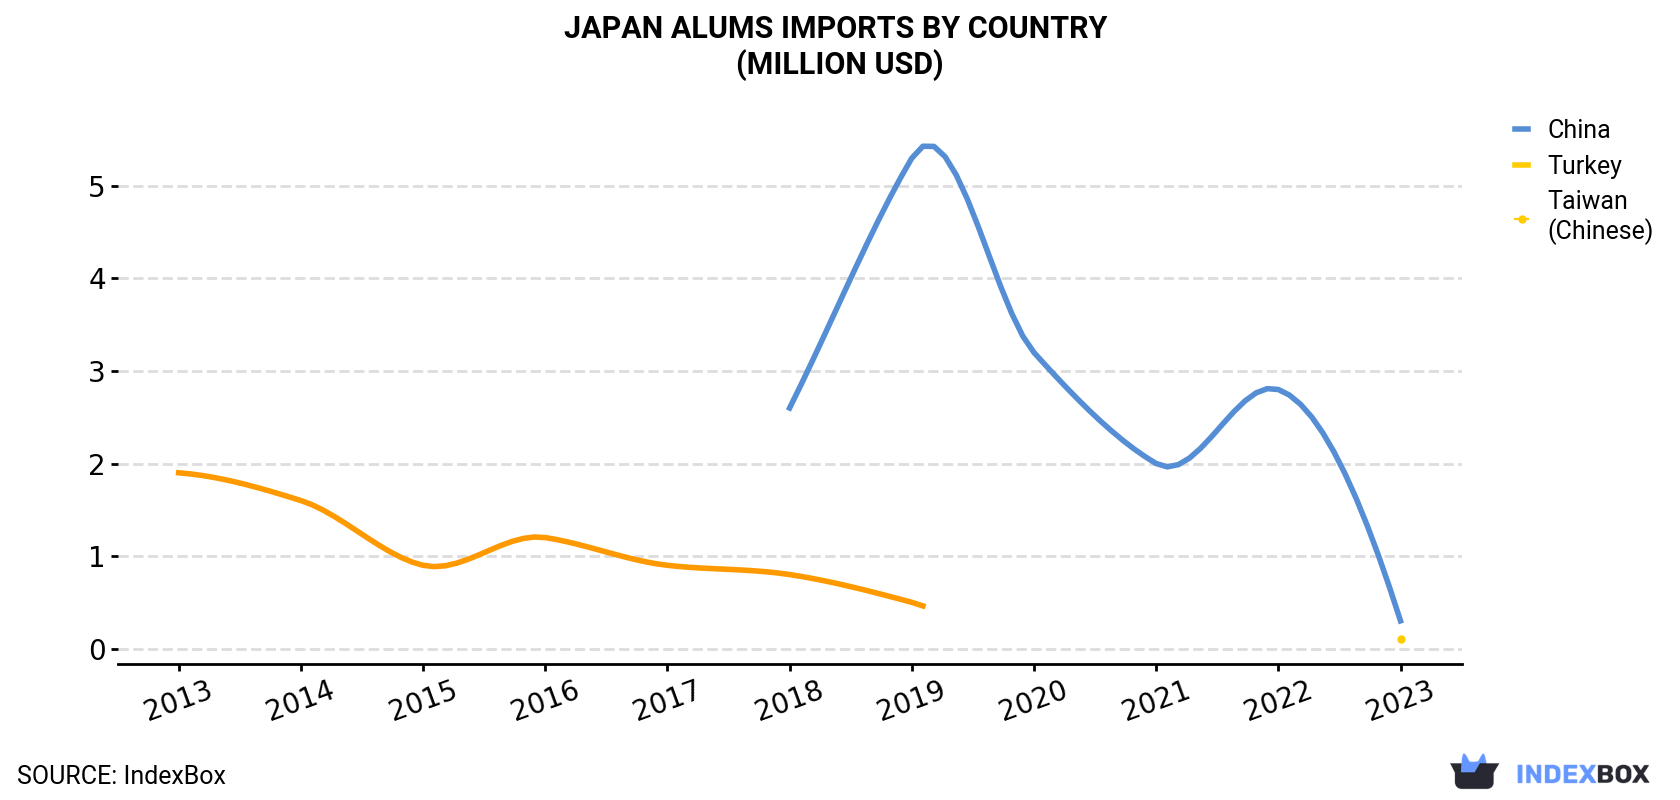 Japan Alums Imports By Country (Million USD)